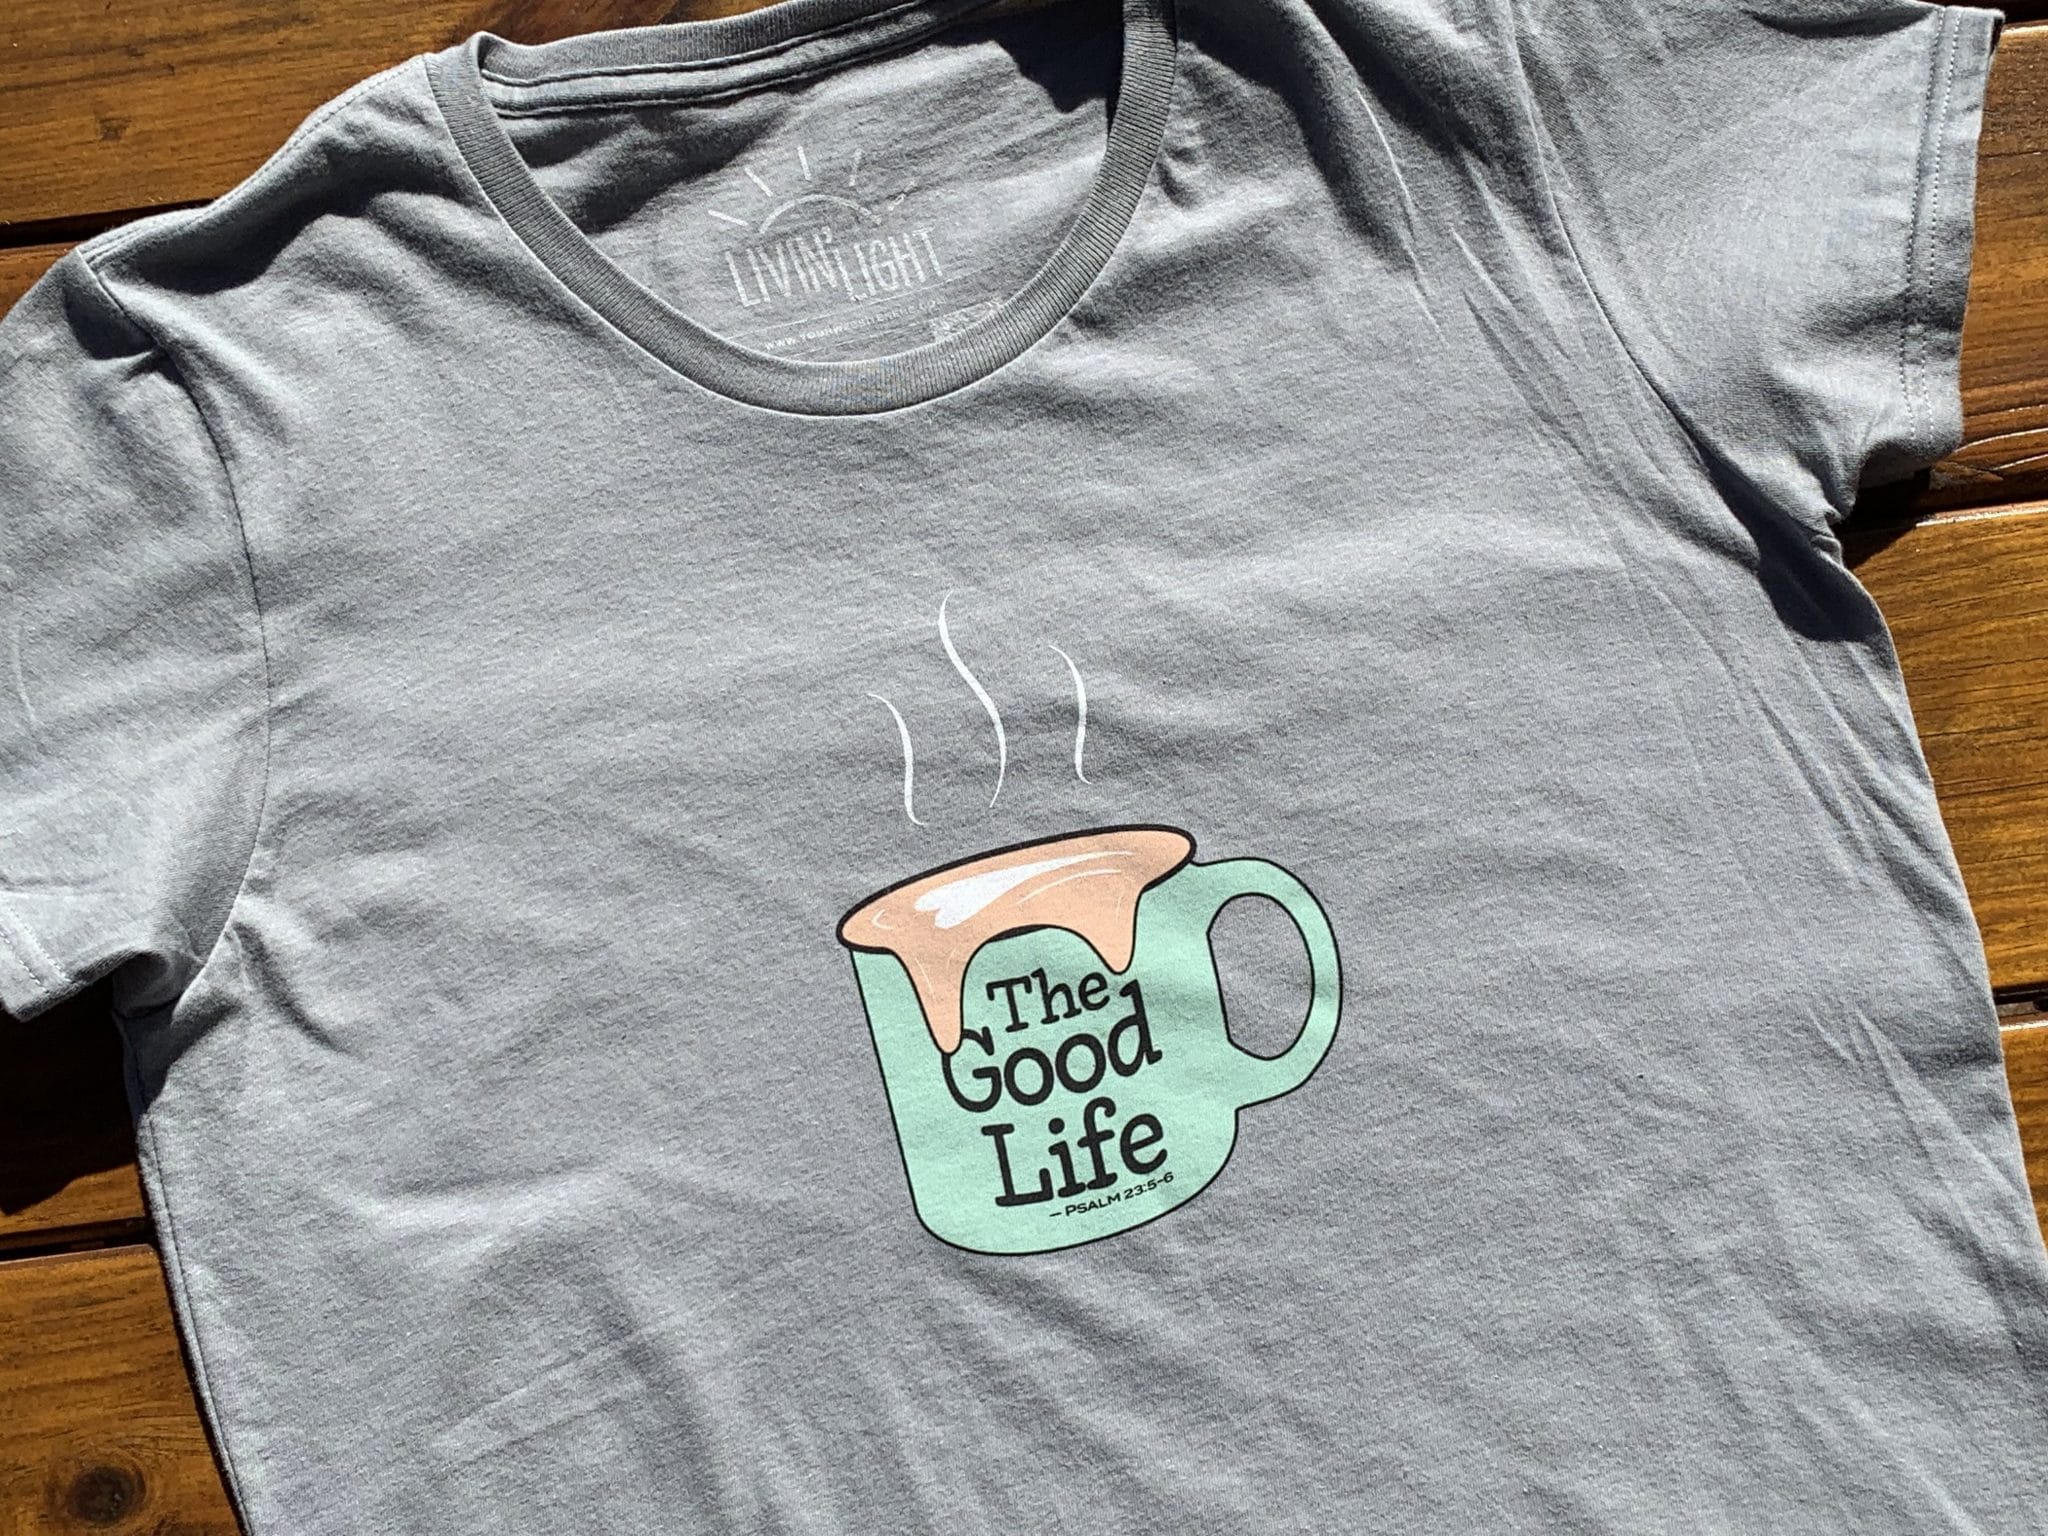 Front of Livin' Light's The Good Life coffee mug shirt with overflowing froth heart on wood background. XL light green mug pops on dark gray shirt. Psalm 23:5-6